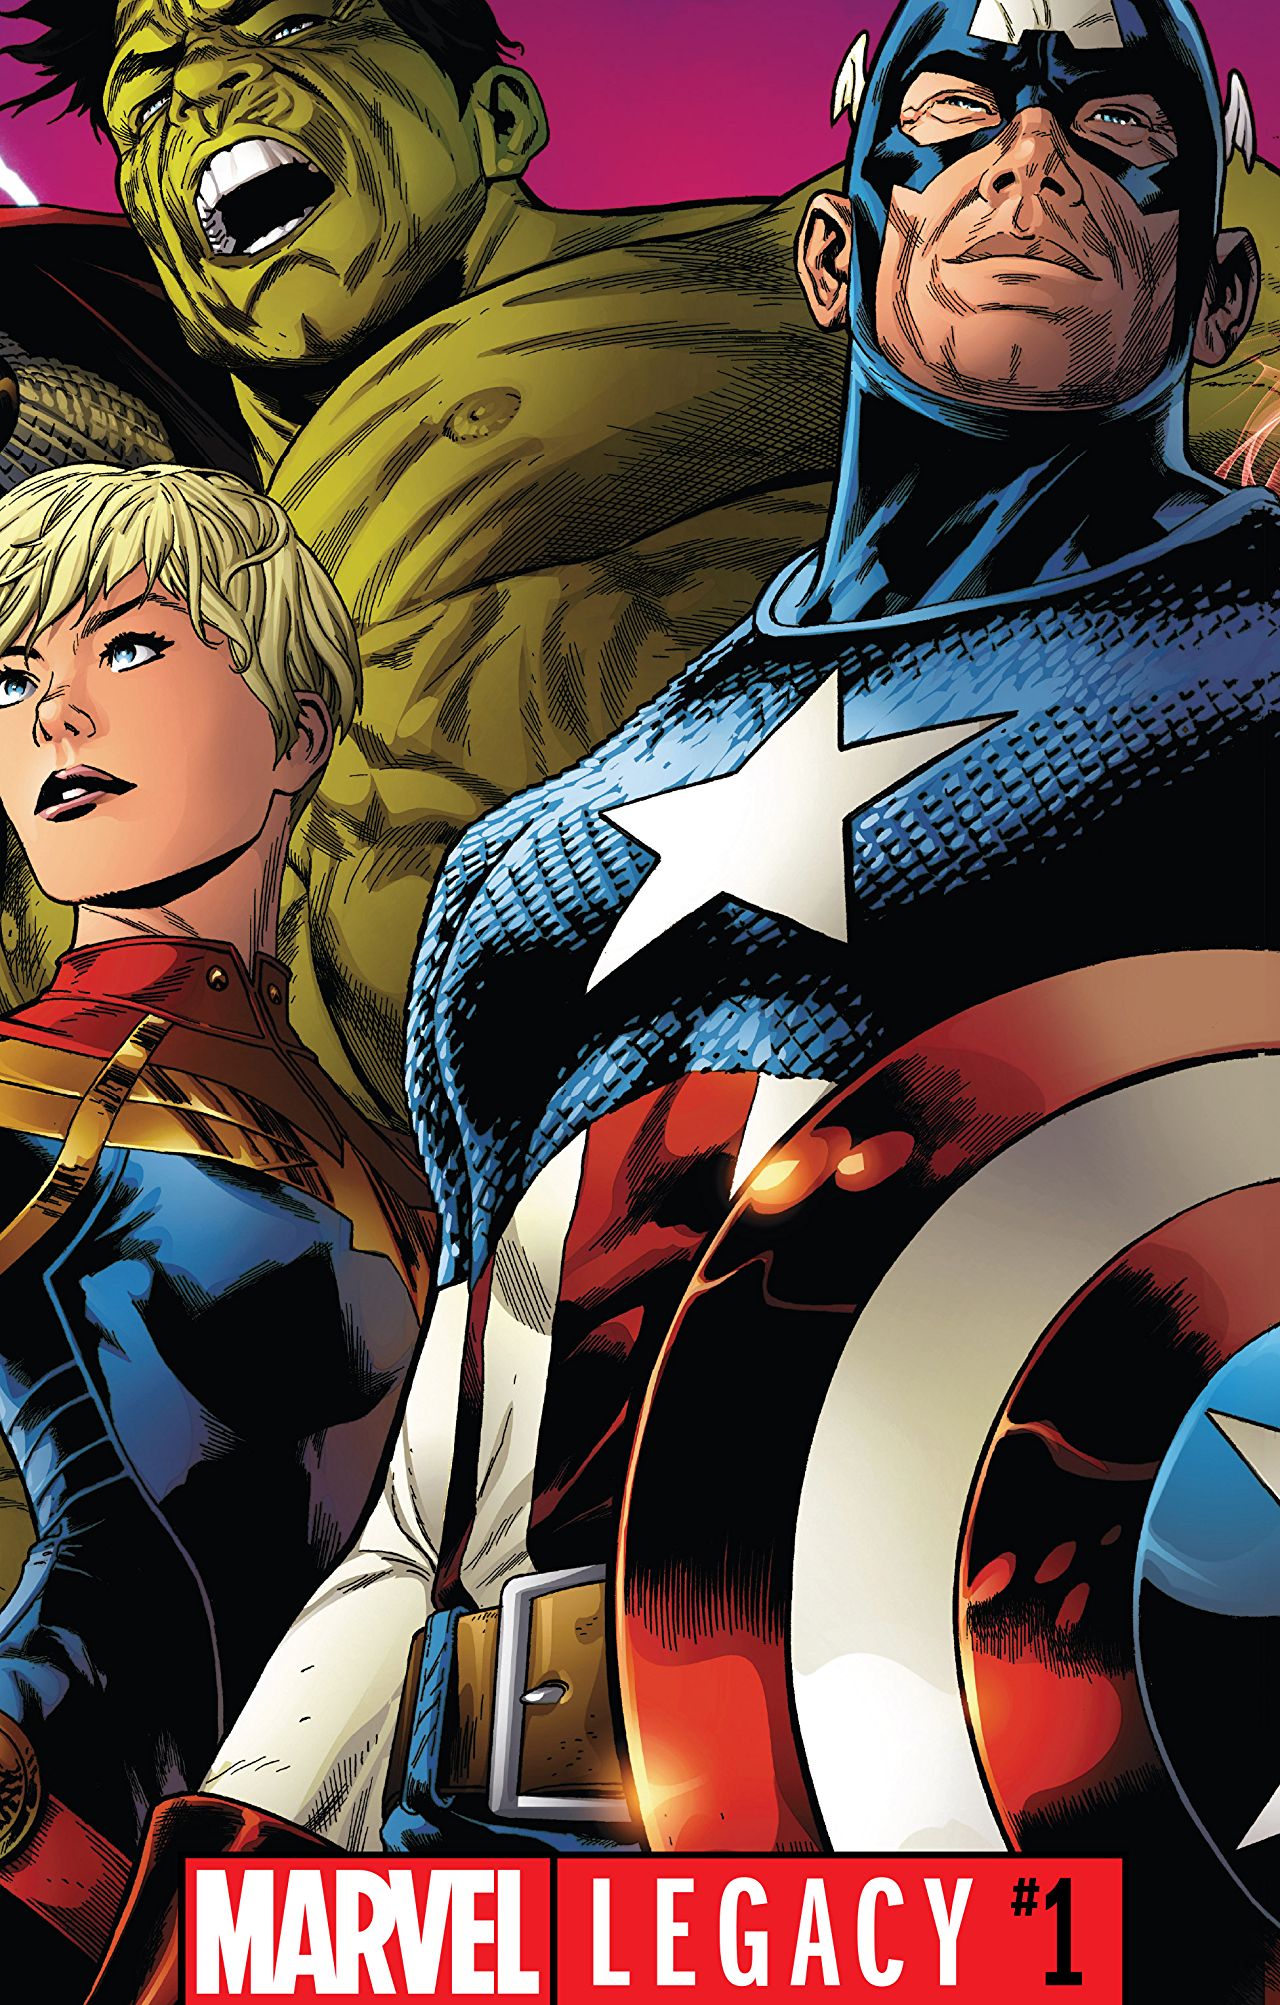 Marvel Legacy Hardcover review: An encyclopedic tease for Marvel's future